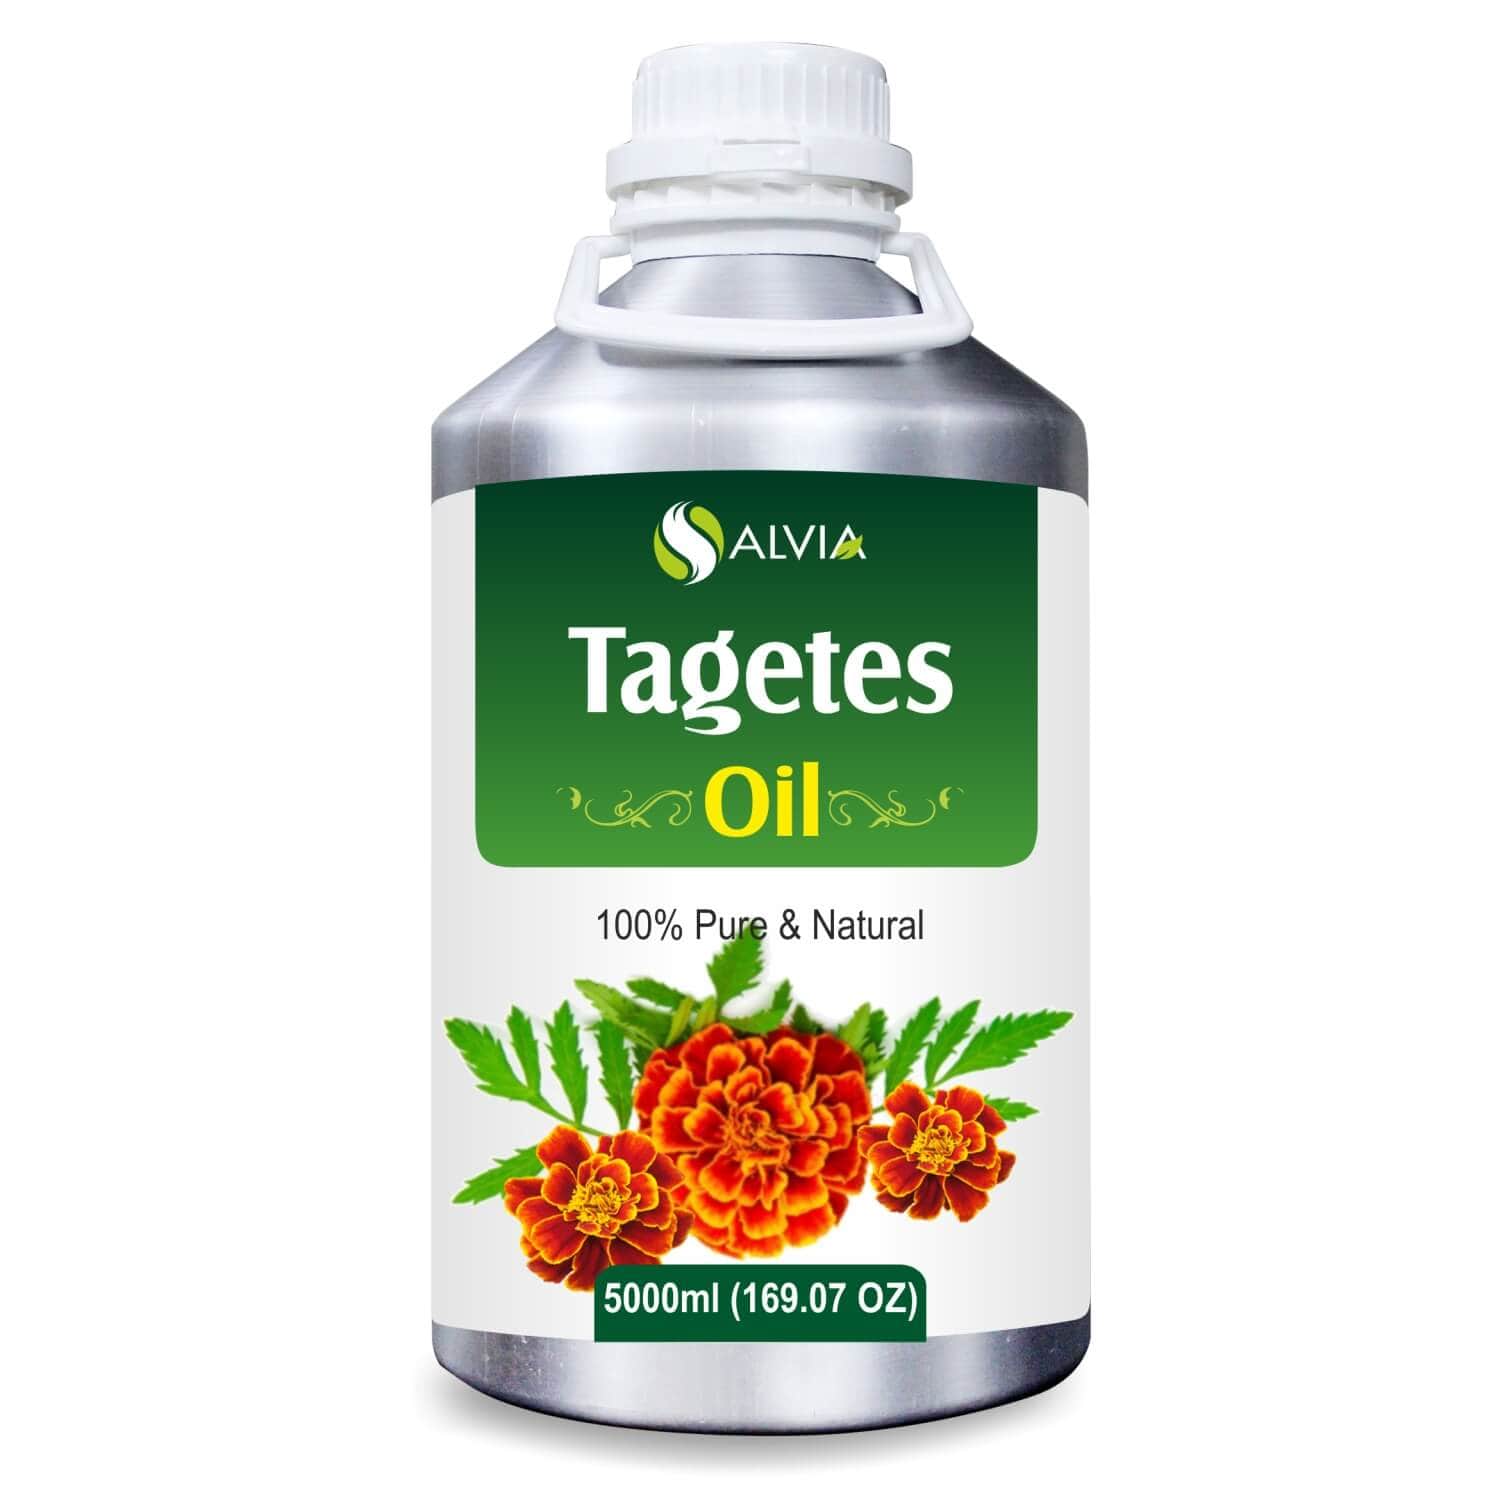 Salvia Natural Essential Oils 5000ml Tagetes Oil (Tagetes Minuta) 100% Natural Undiluted Essential Oil Relieve Cuts & Wounds, Reduce Tension, Relieves Cough, Heals Skin Conditions, Heals Wounds